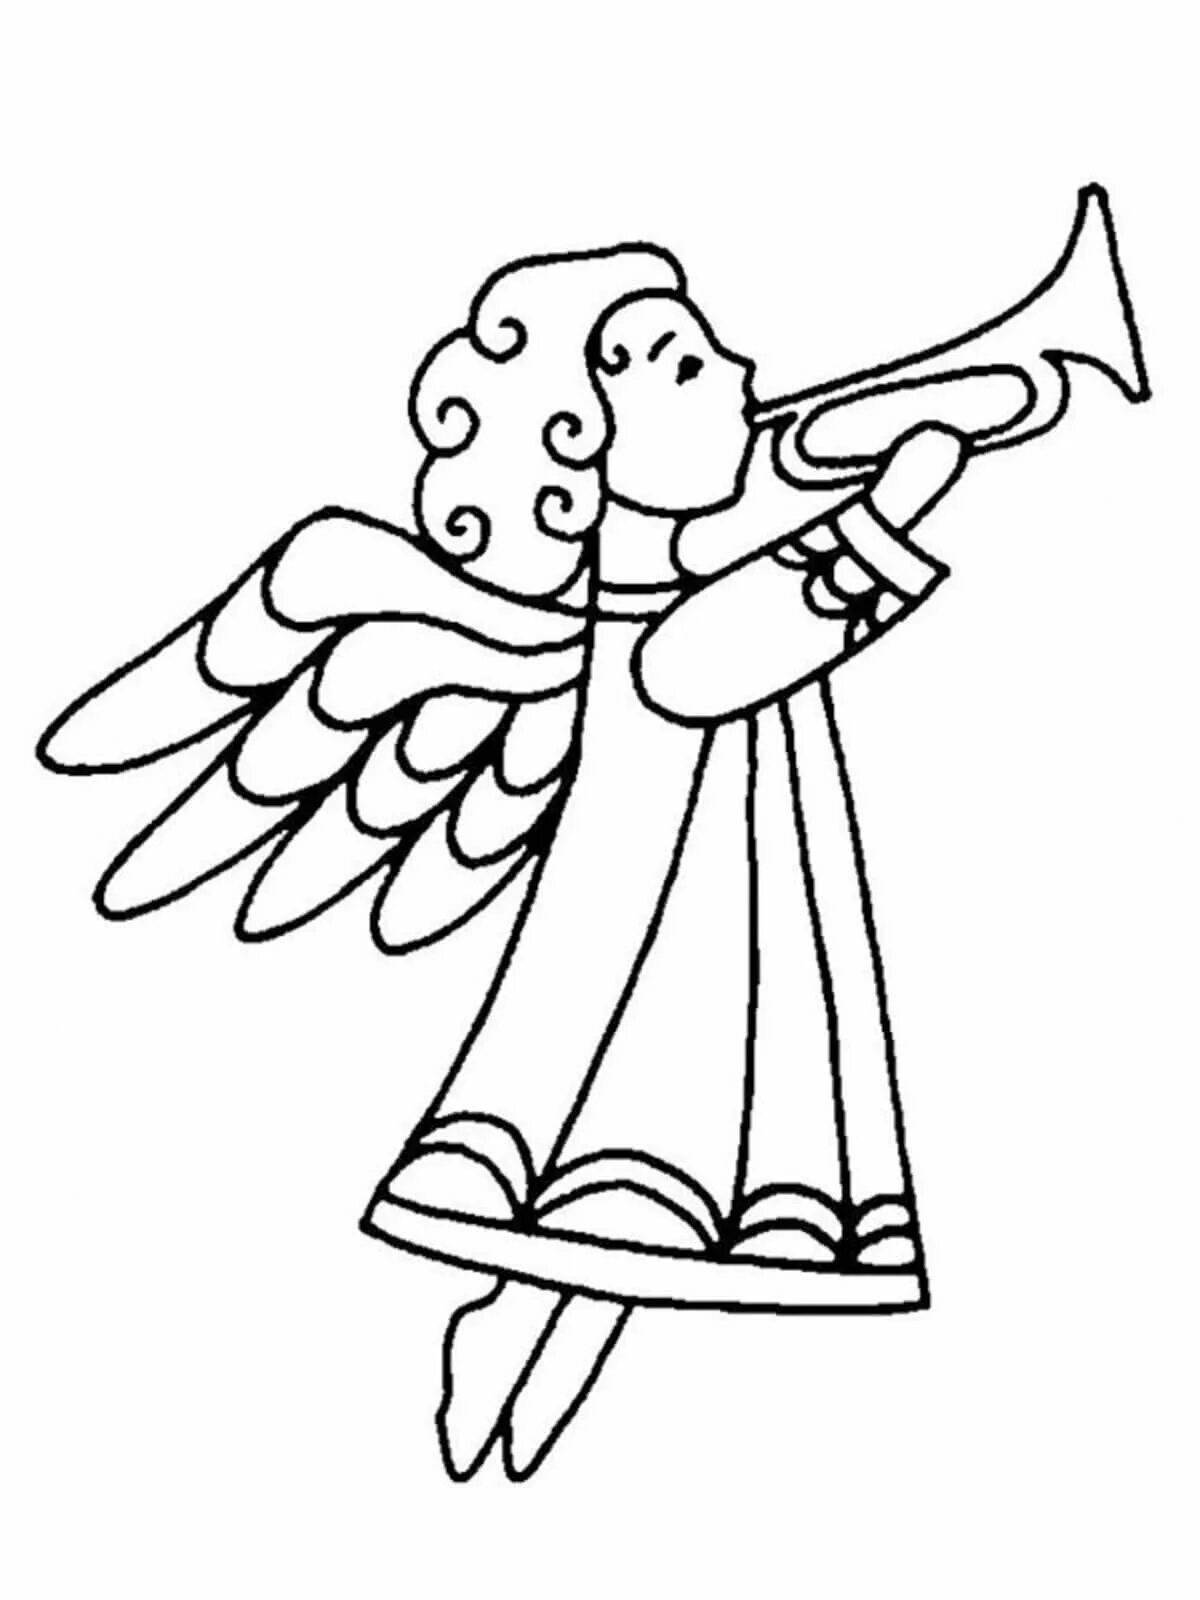 Shining angel coloring book for kids